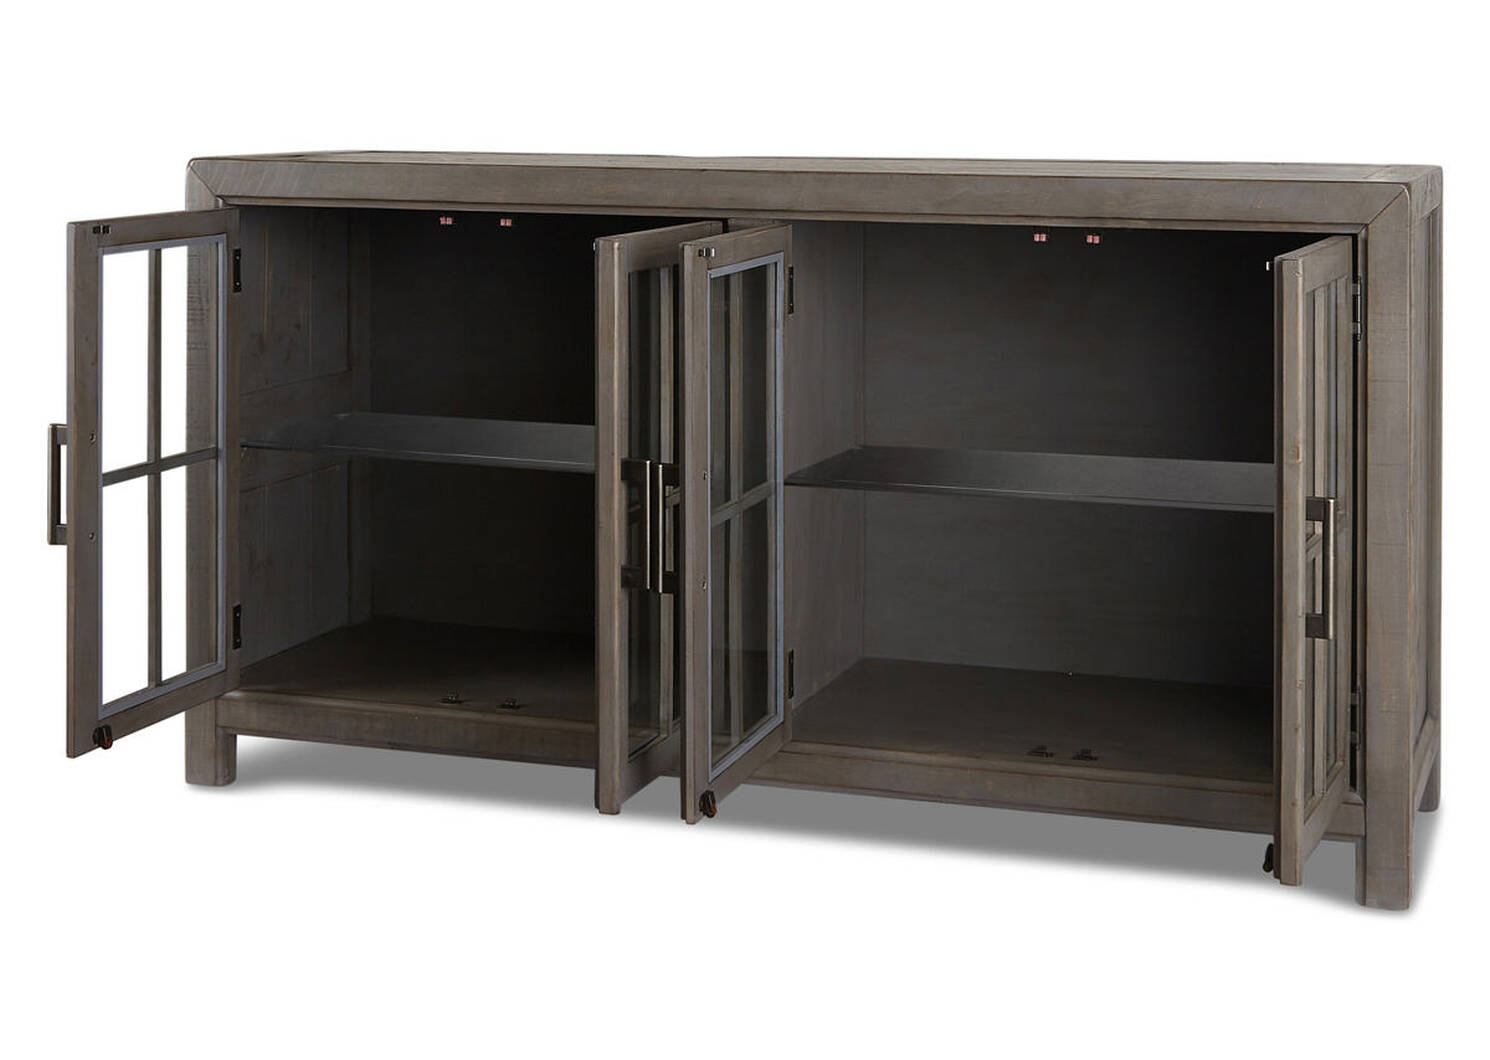 Churchill Sideboard -Pewter